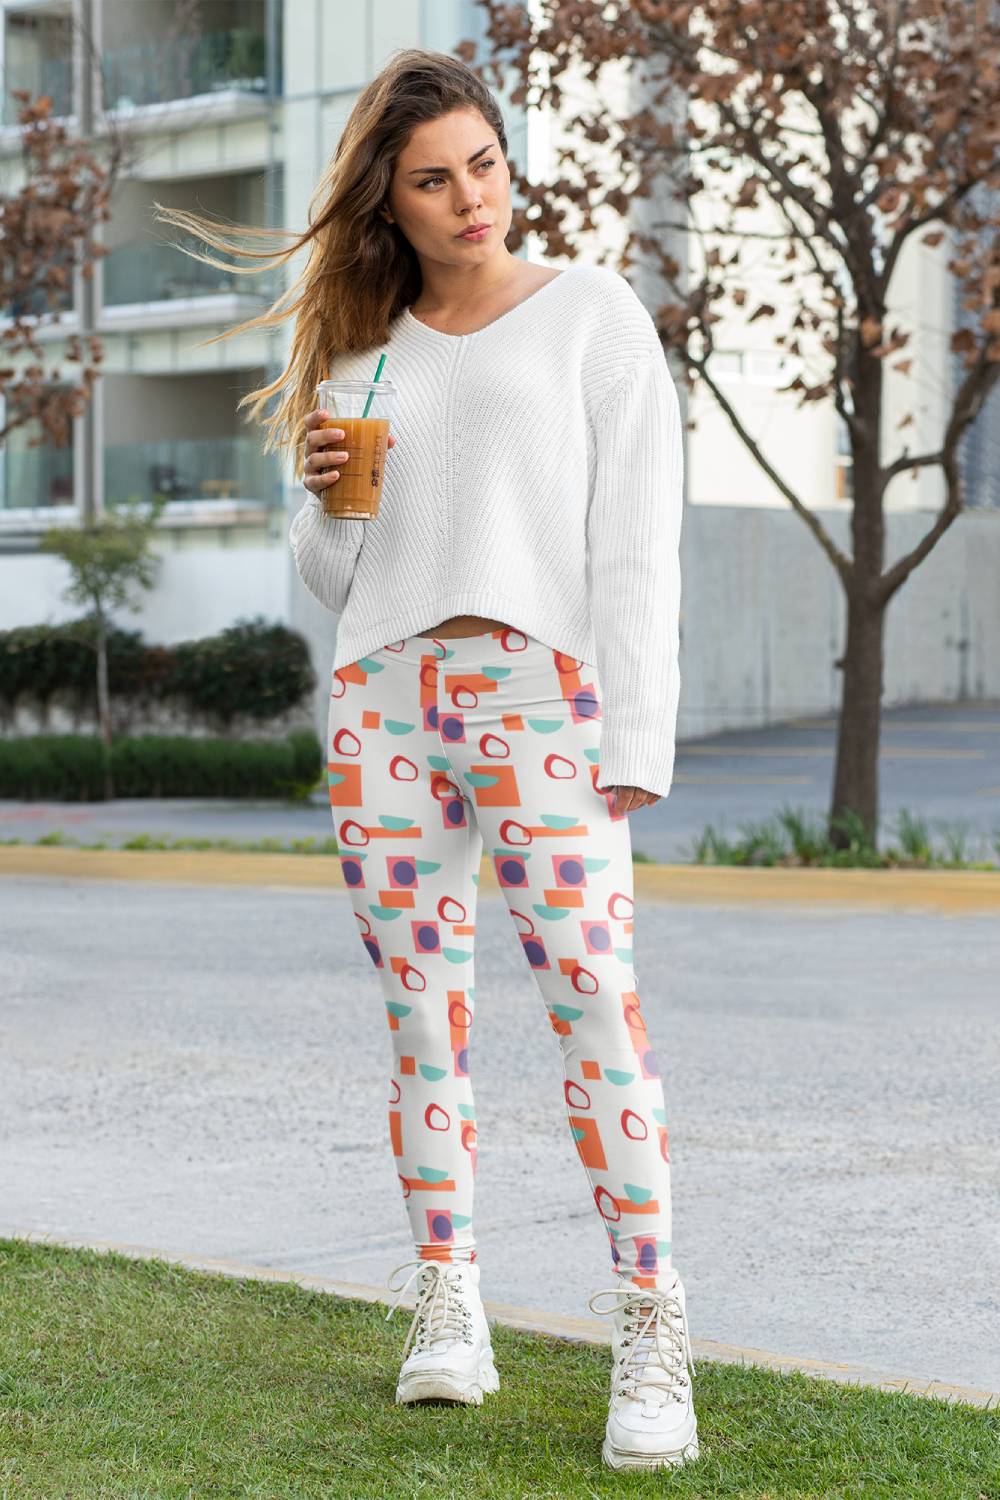 Styling neutral look with patterned leggings